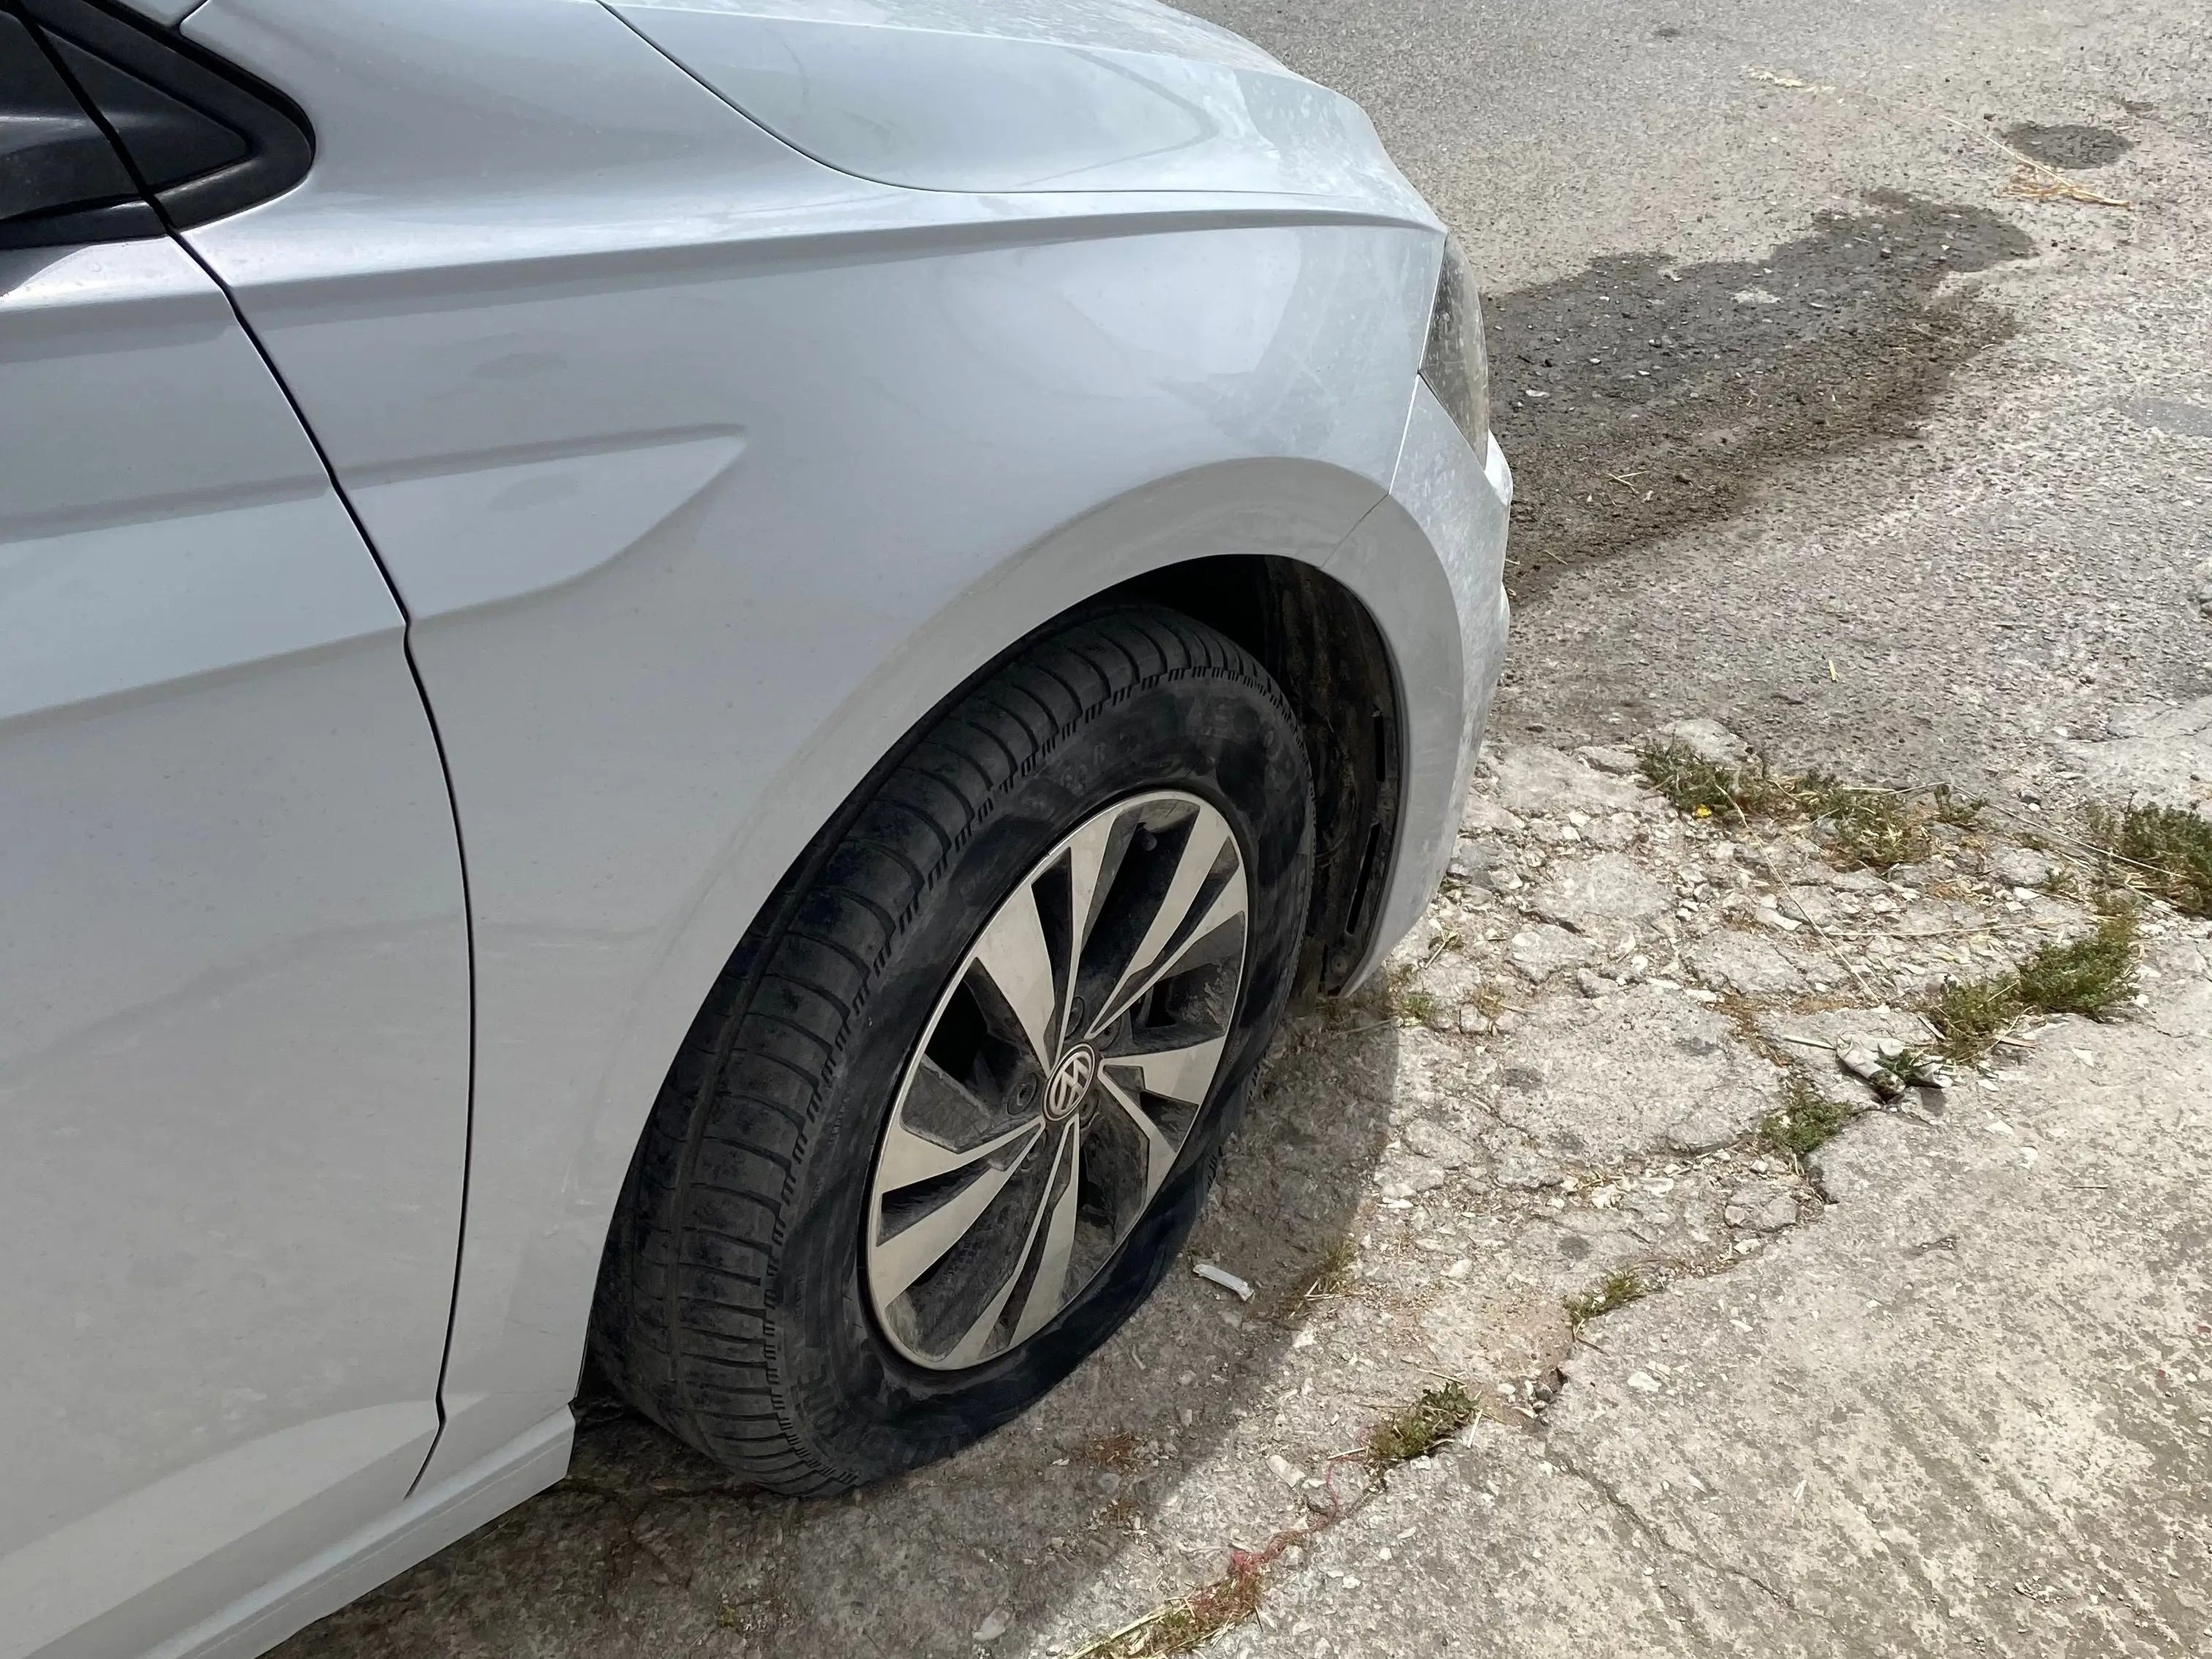 car with a flat tire on a paved road